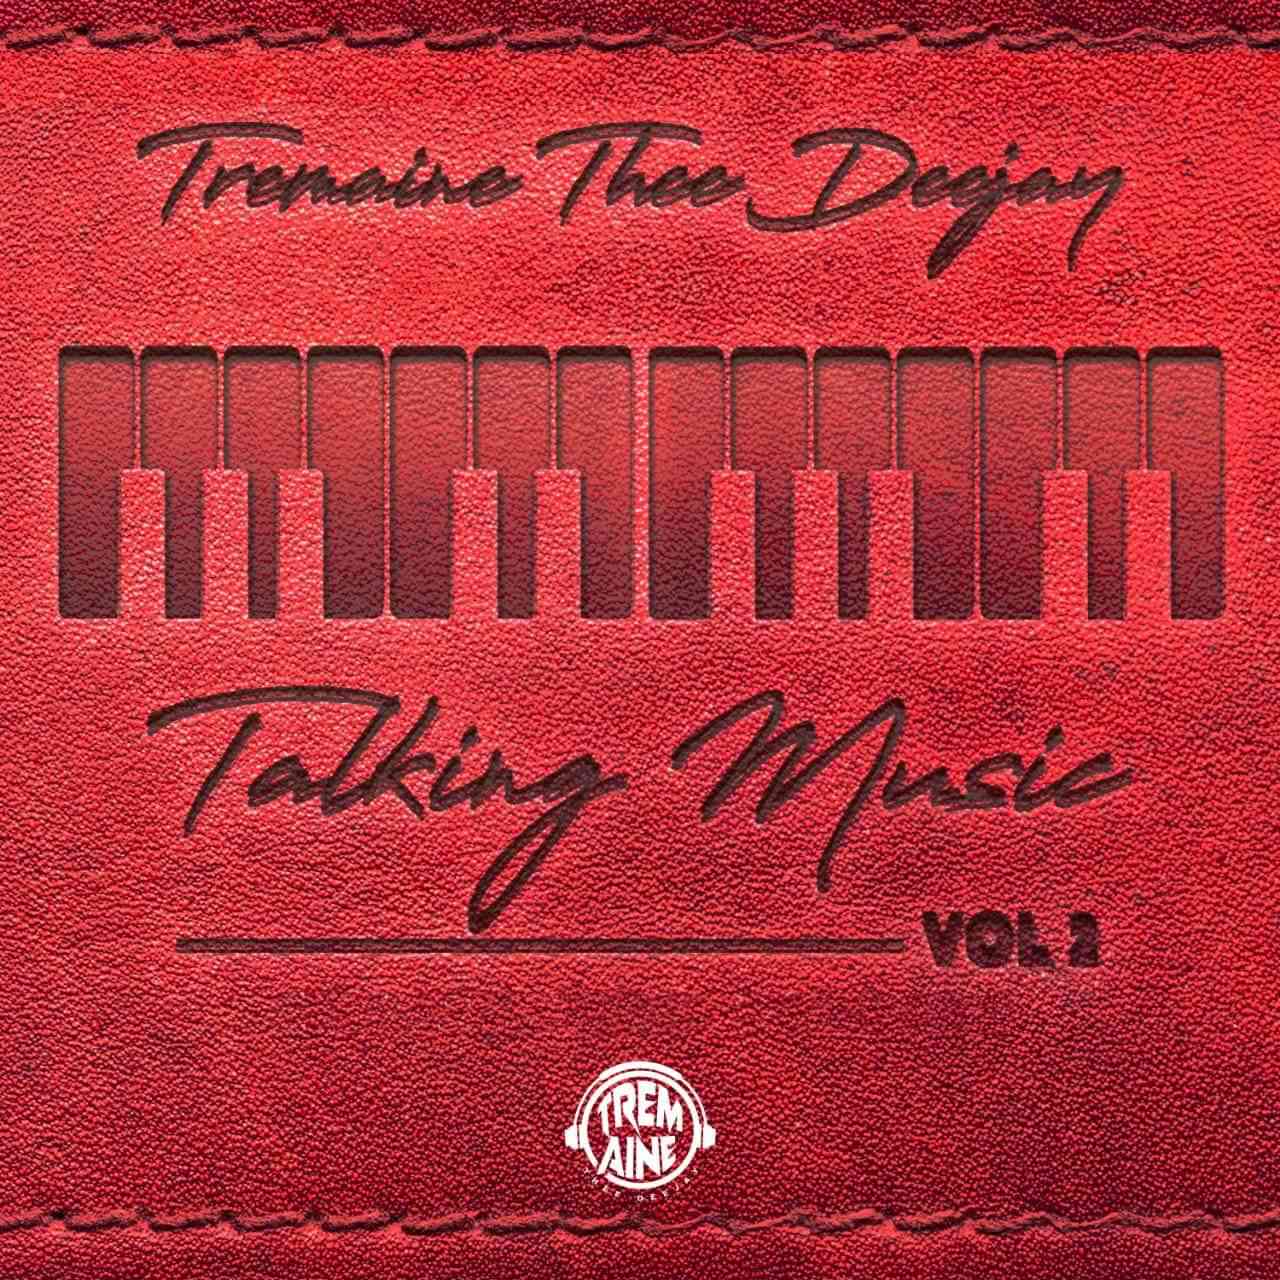 The Squad (Tremaine Thee Deejay) Talking Music Vol.2 Mix 